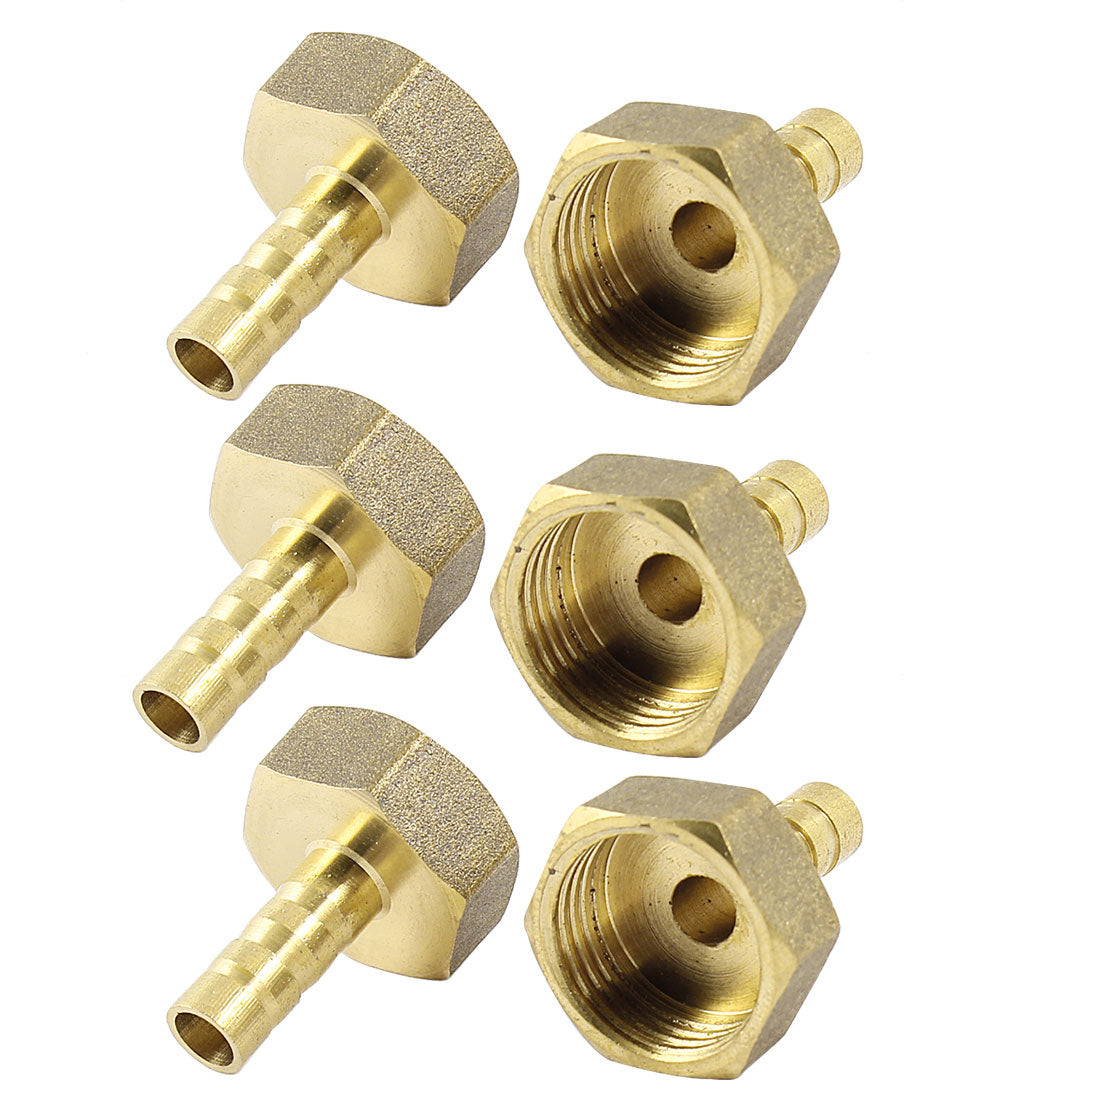 uxcell Uxcell 6pcs Brass 8mm Hose Barb to 1/2 PT Female Threaded Air Water Gas Quick Coupling Connector Fitting Adapter